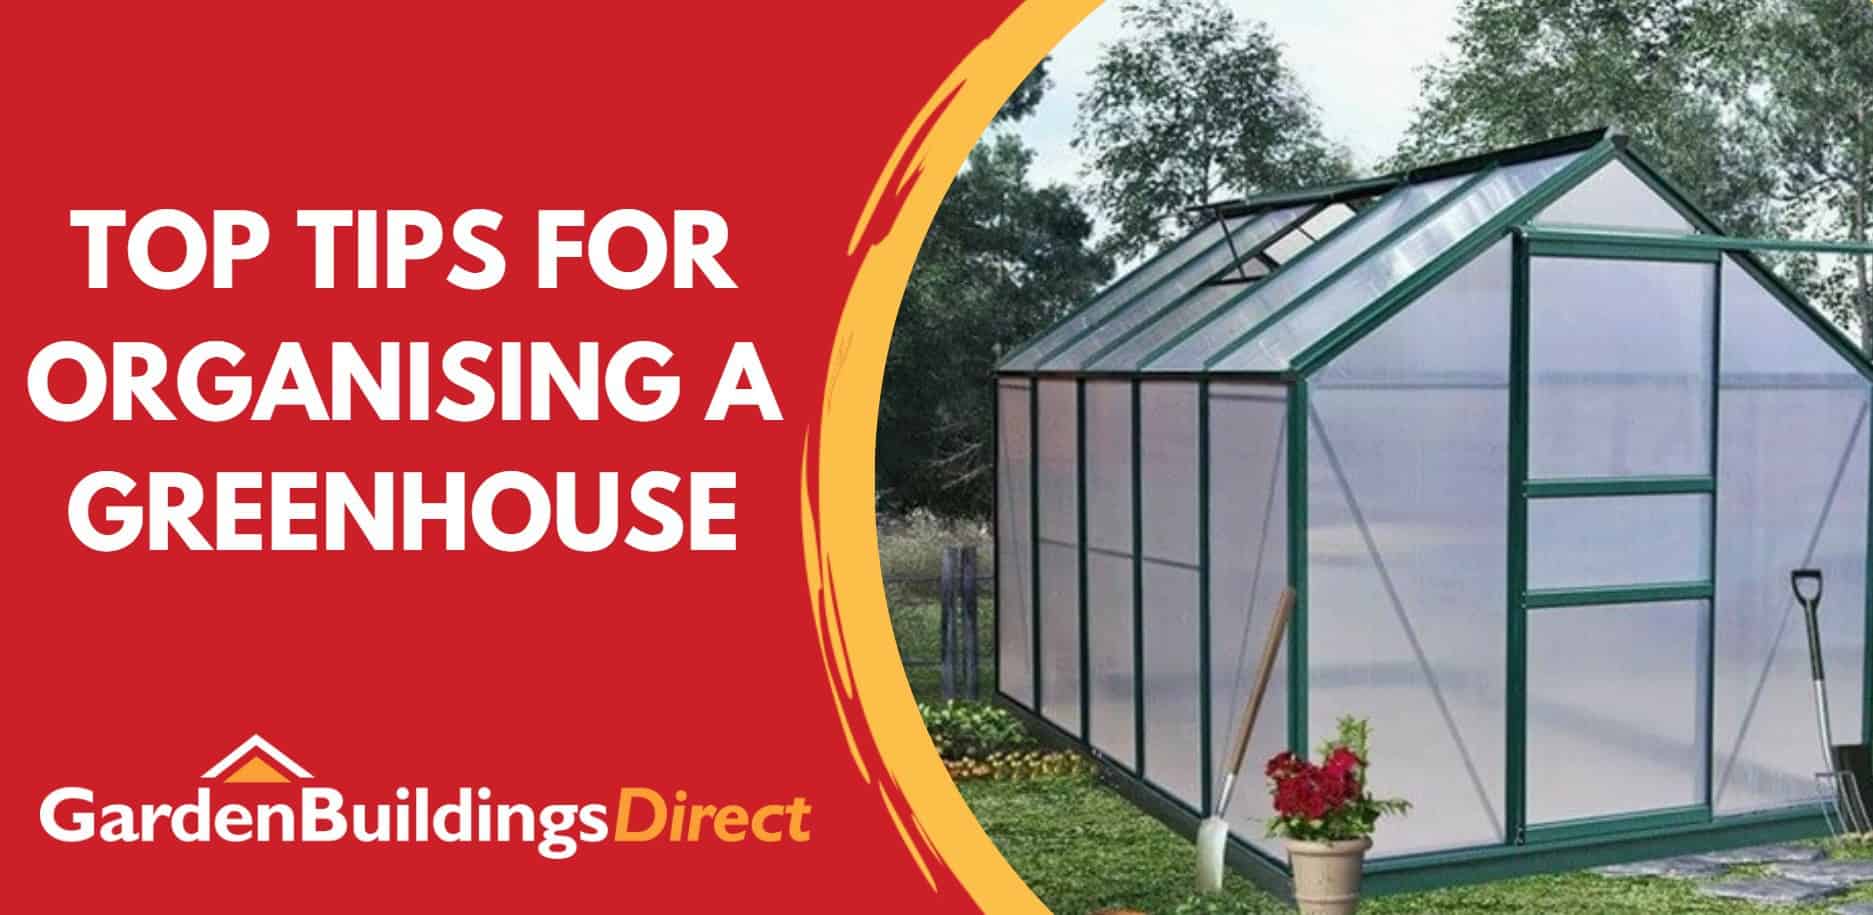 Greenhouse next to text "Top tips for organising a greenhouse"